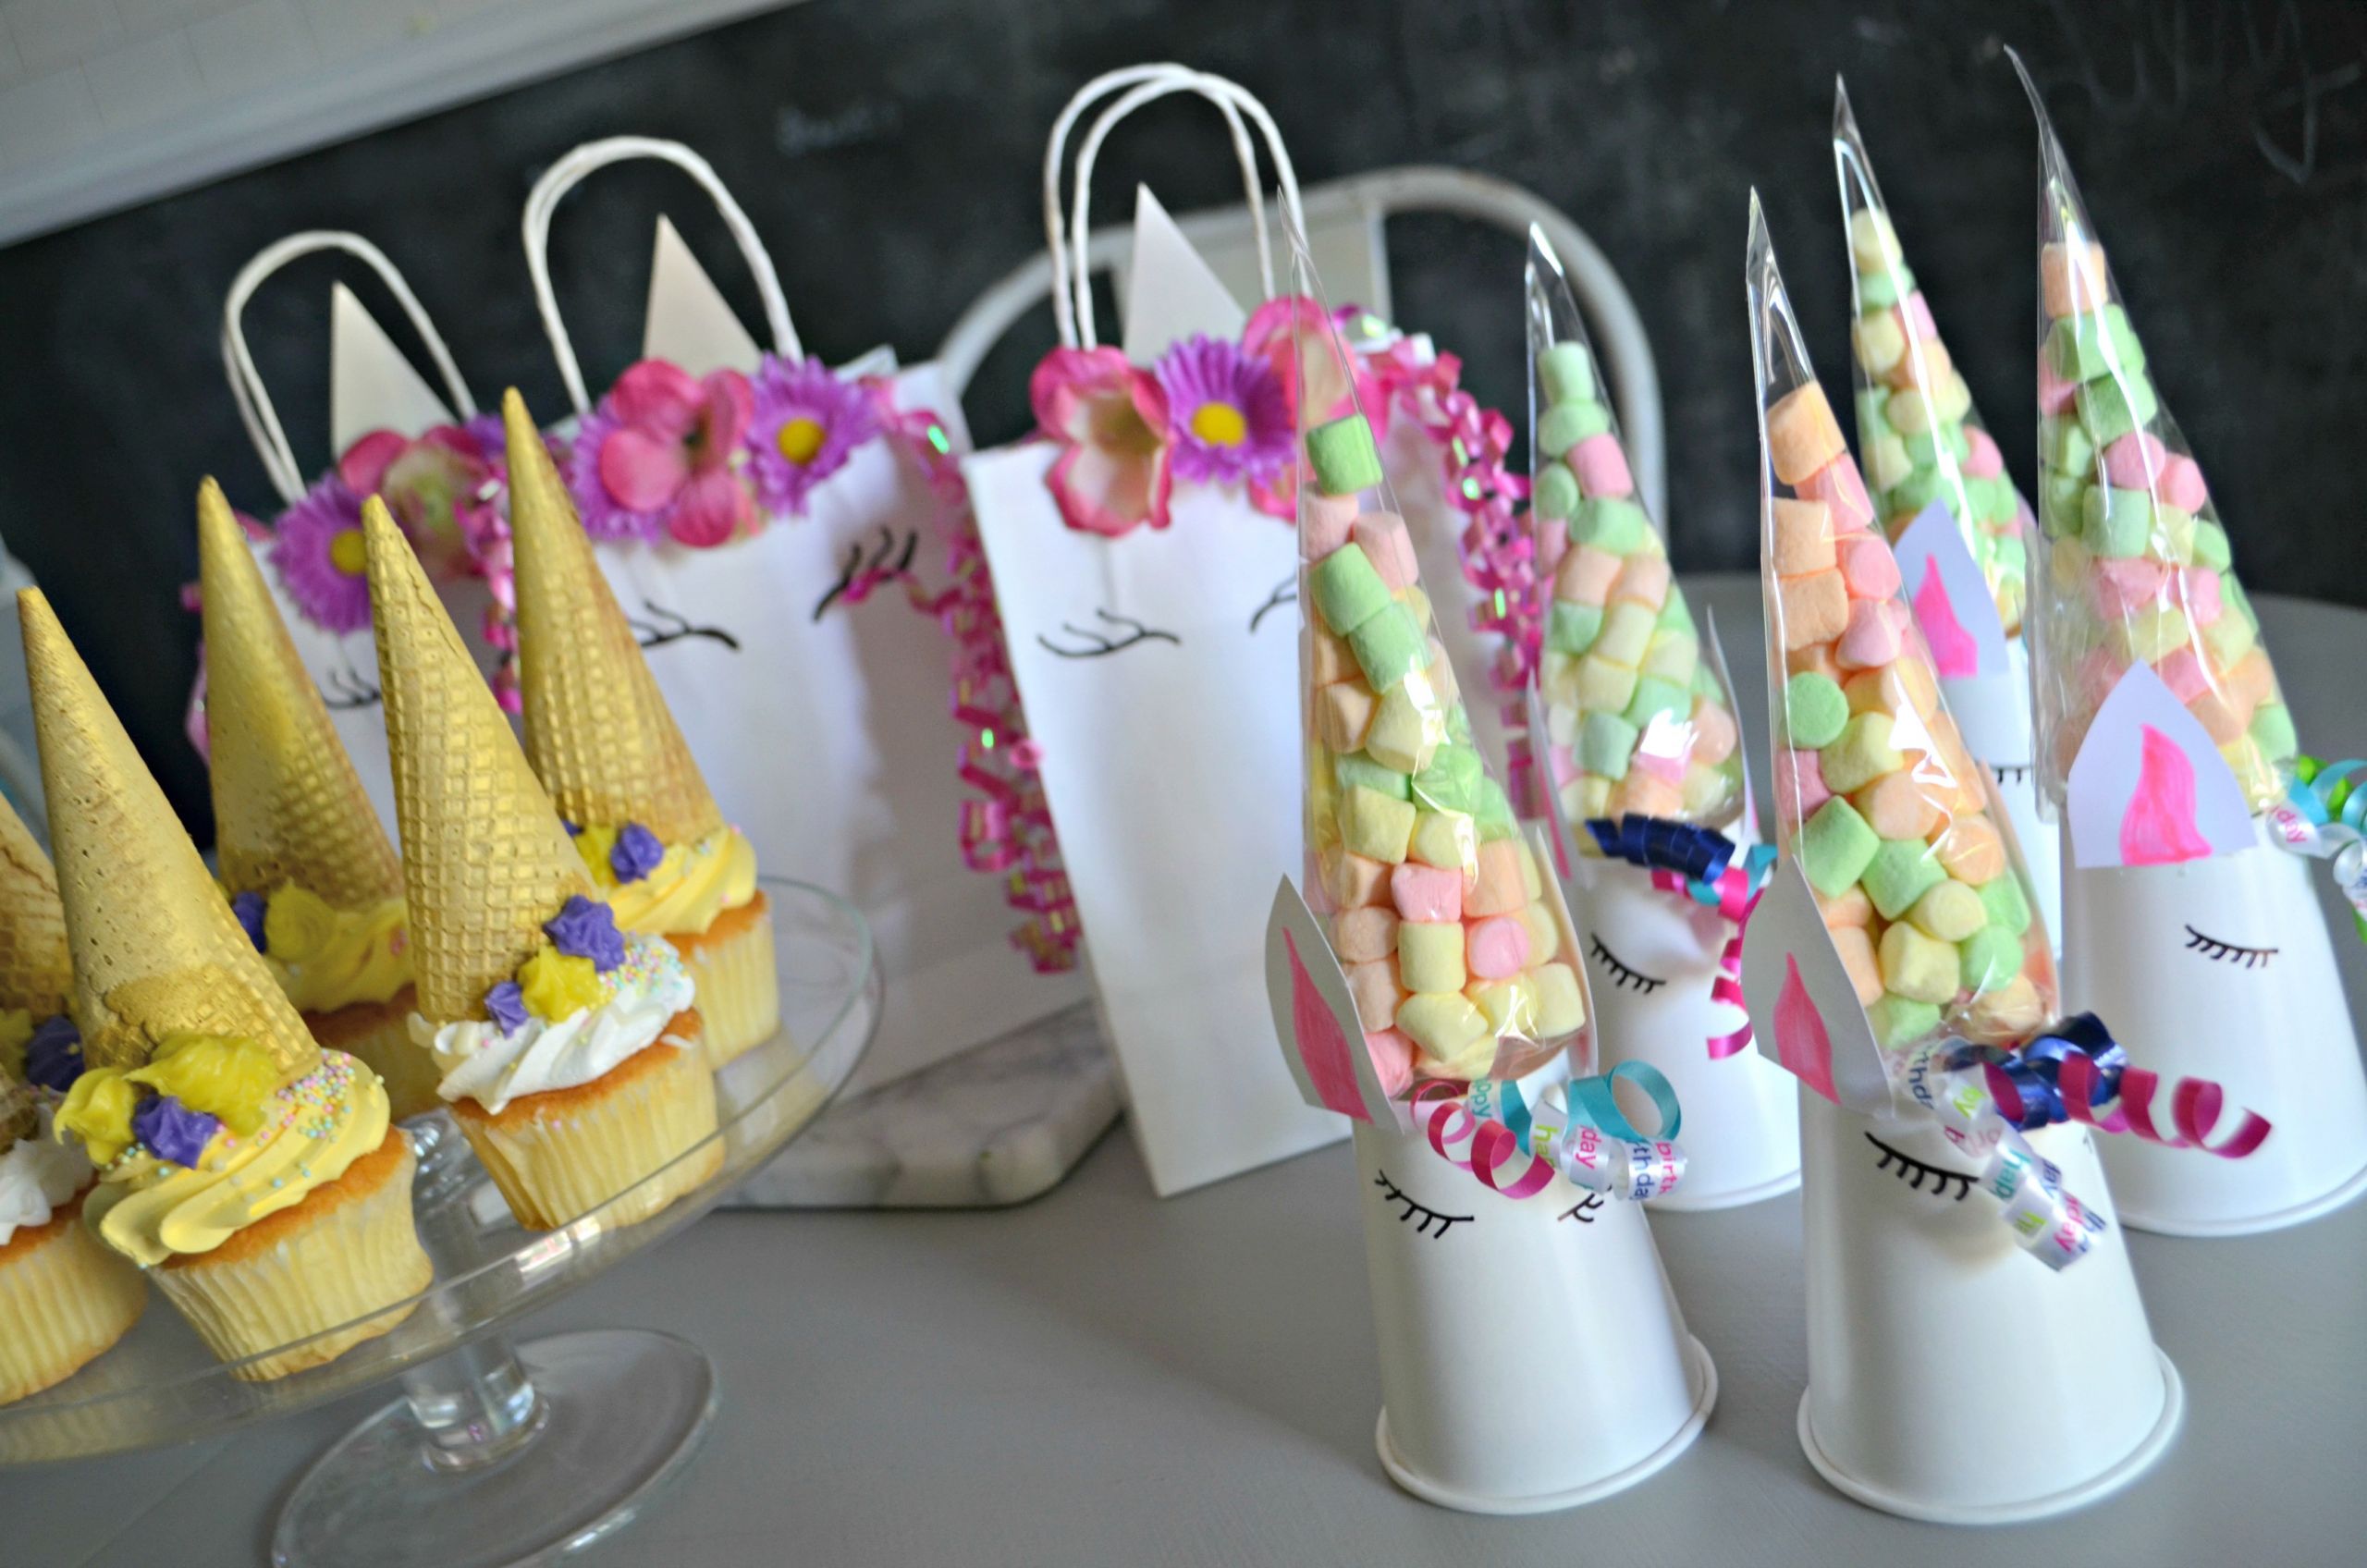 Unicorn Food Party Favor Ideas
 Top 10 Unicorn Theme Party Ideas and Tips